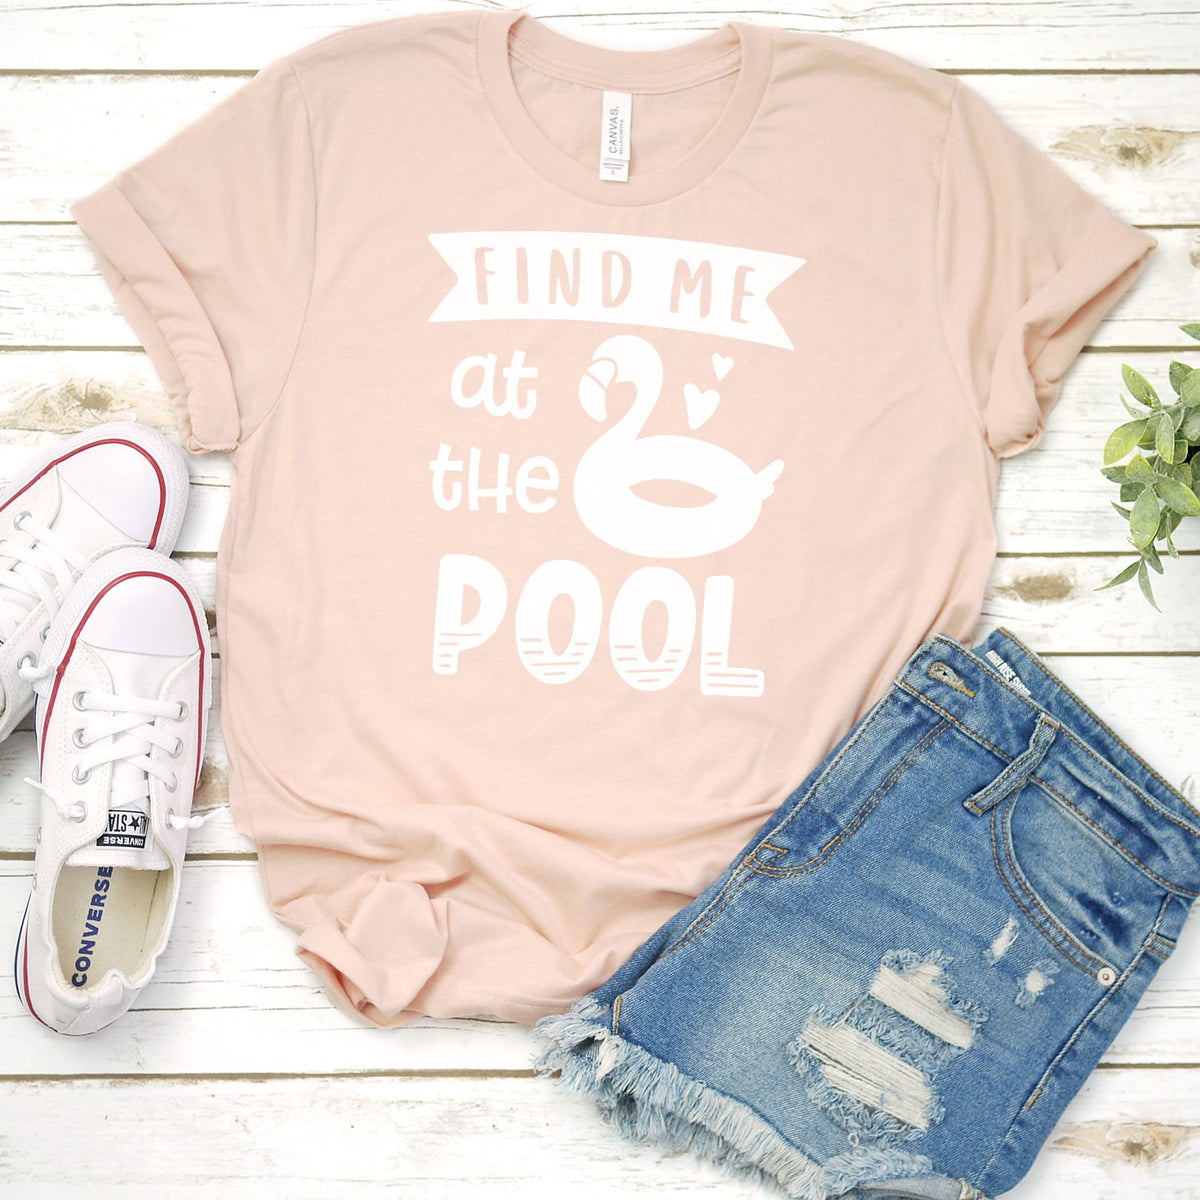 Find Me At The Pool - Short Sleeve Tee Shirt